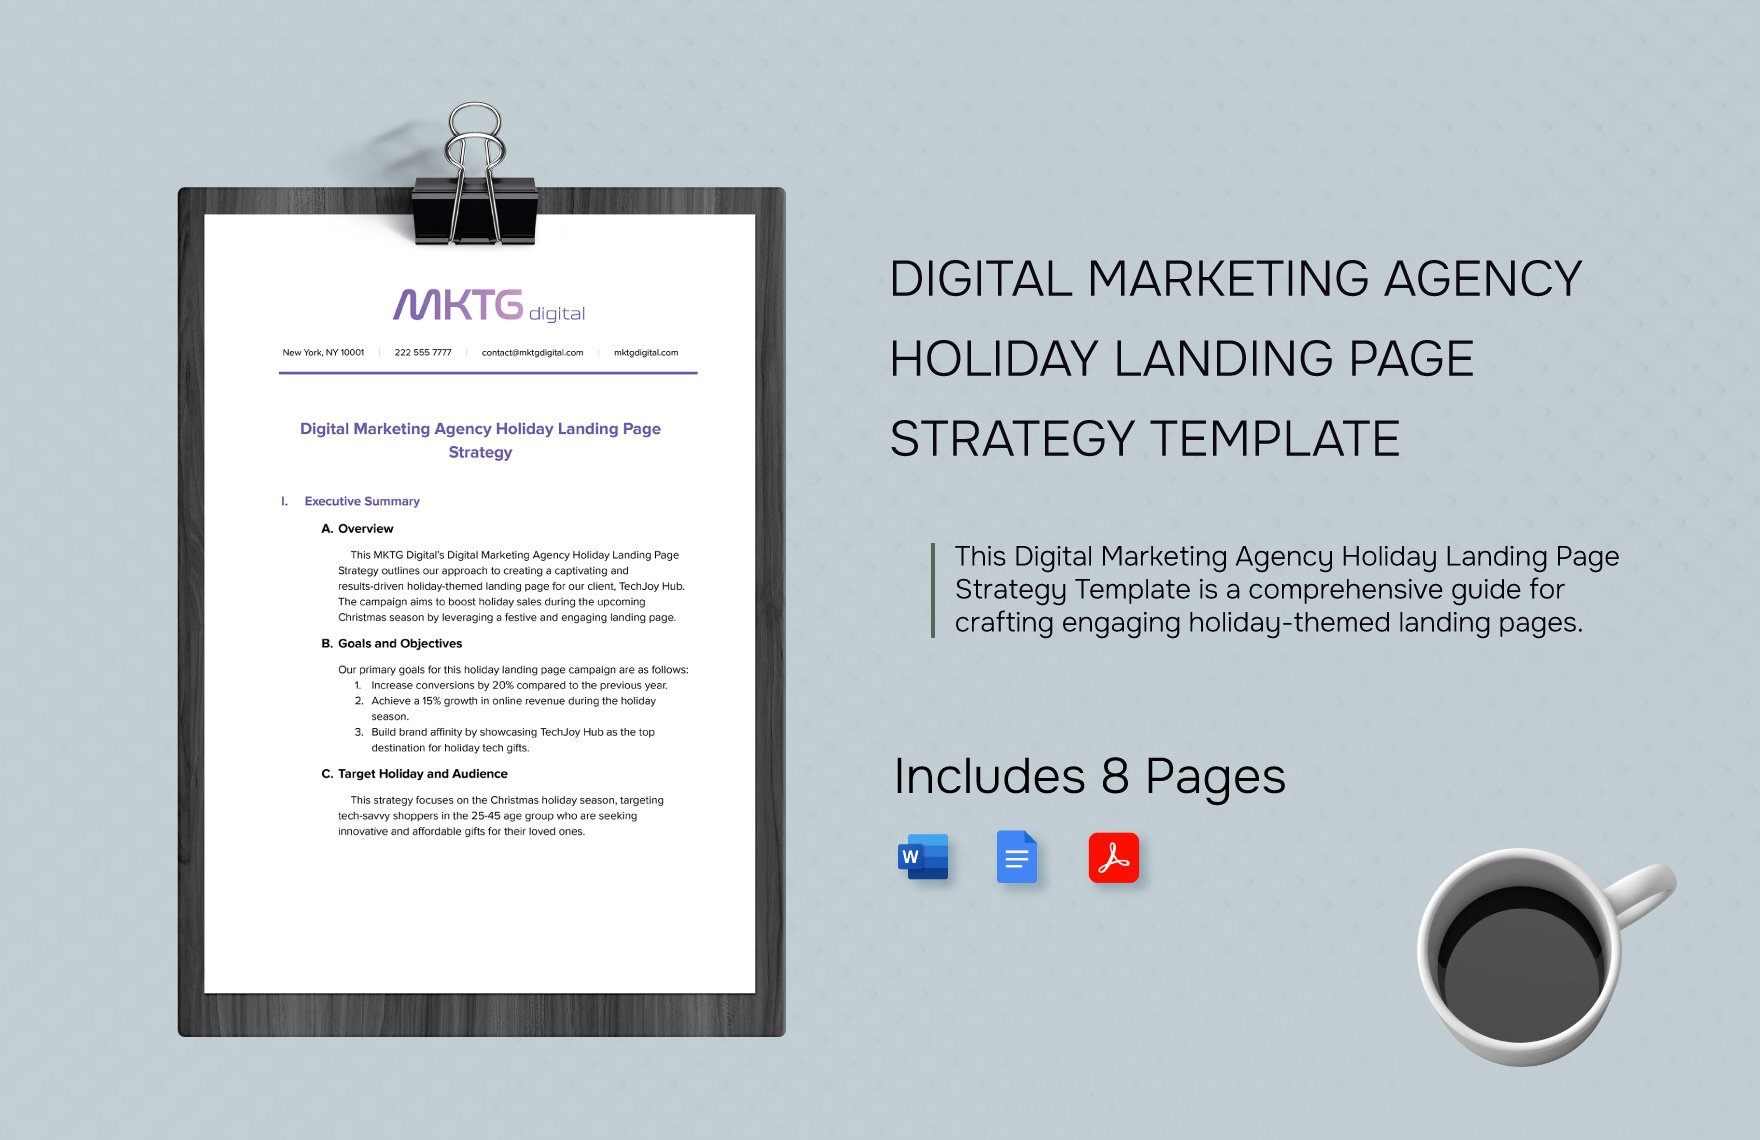 Digital Marketing Agency Holiday Landing Page Strategy Template